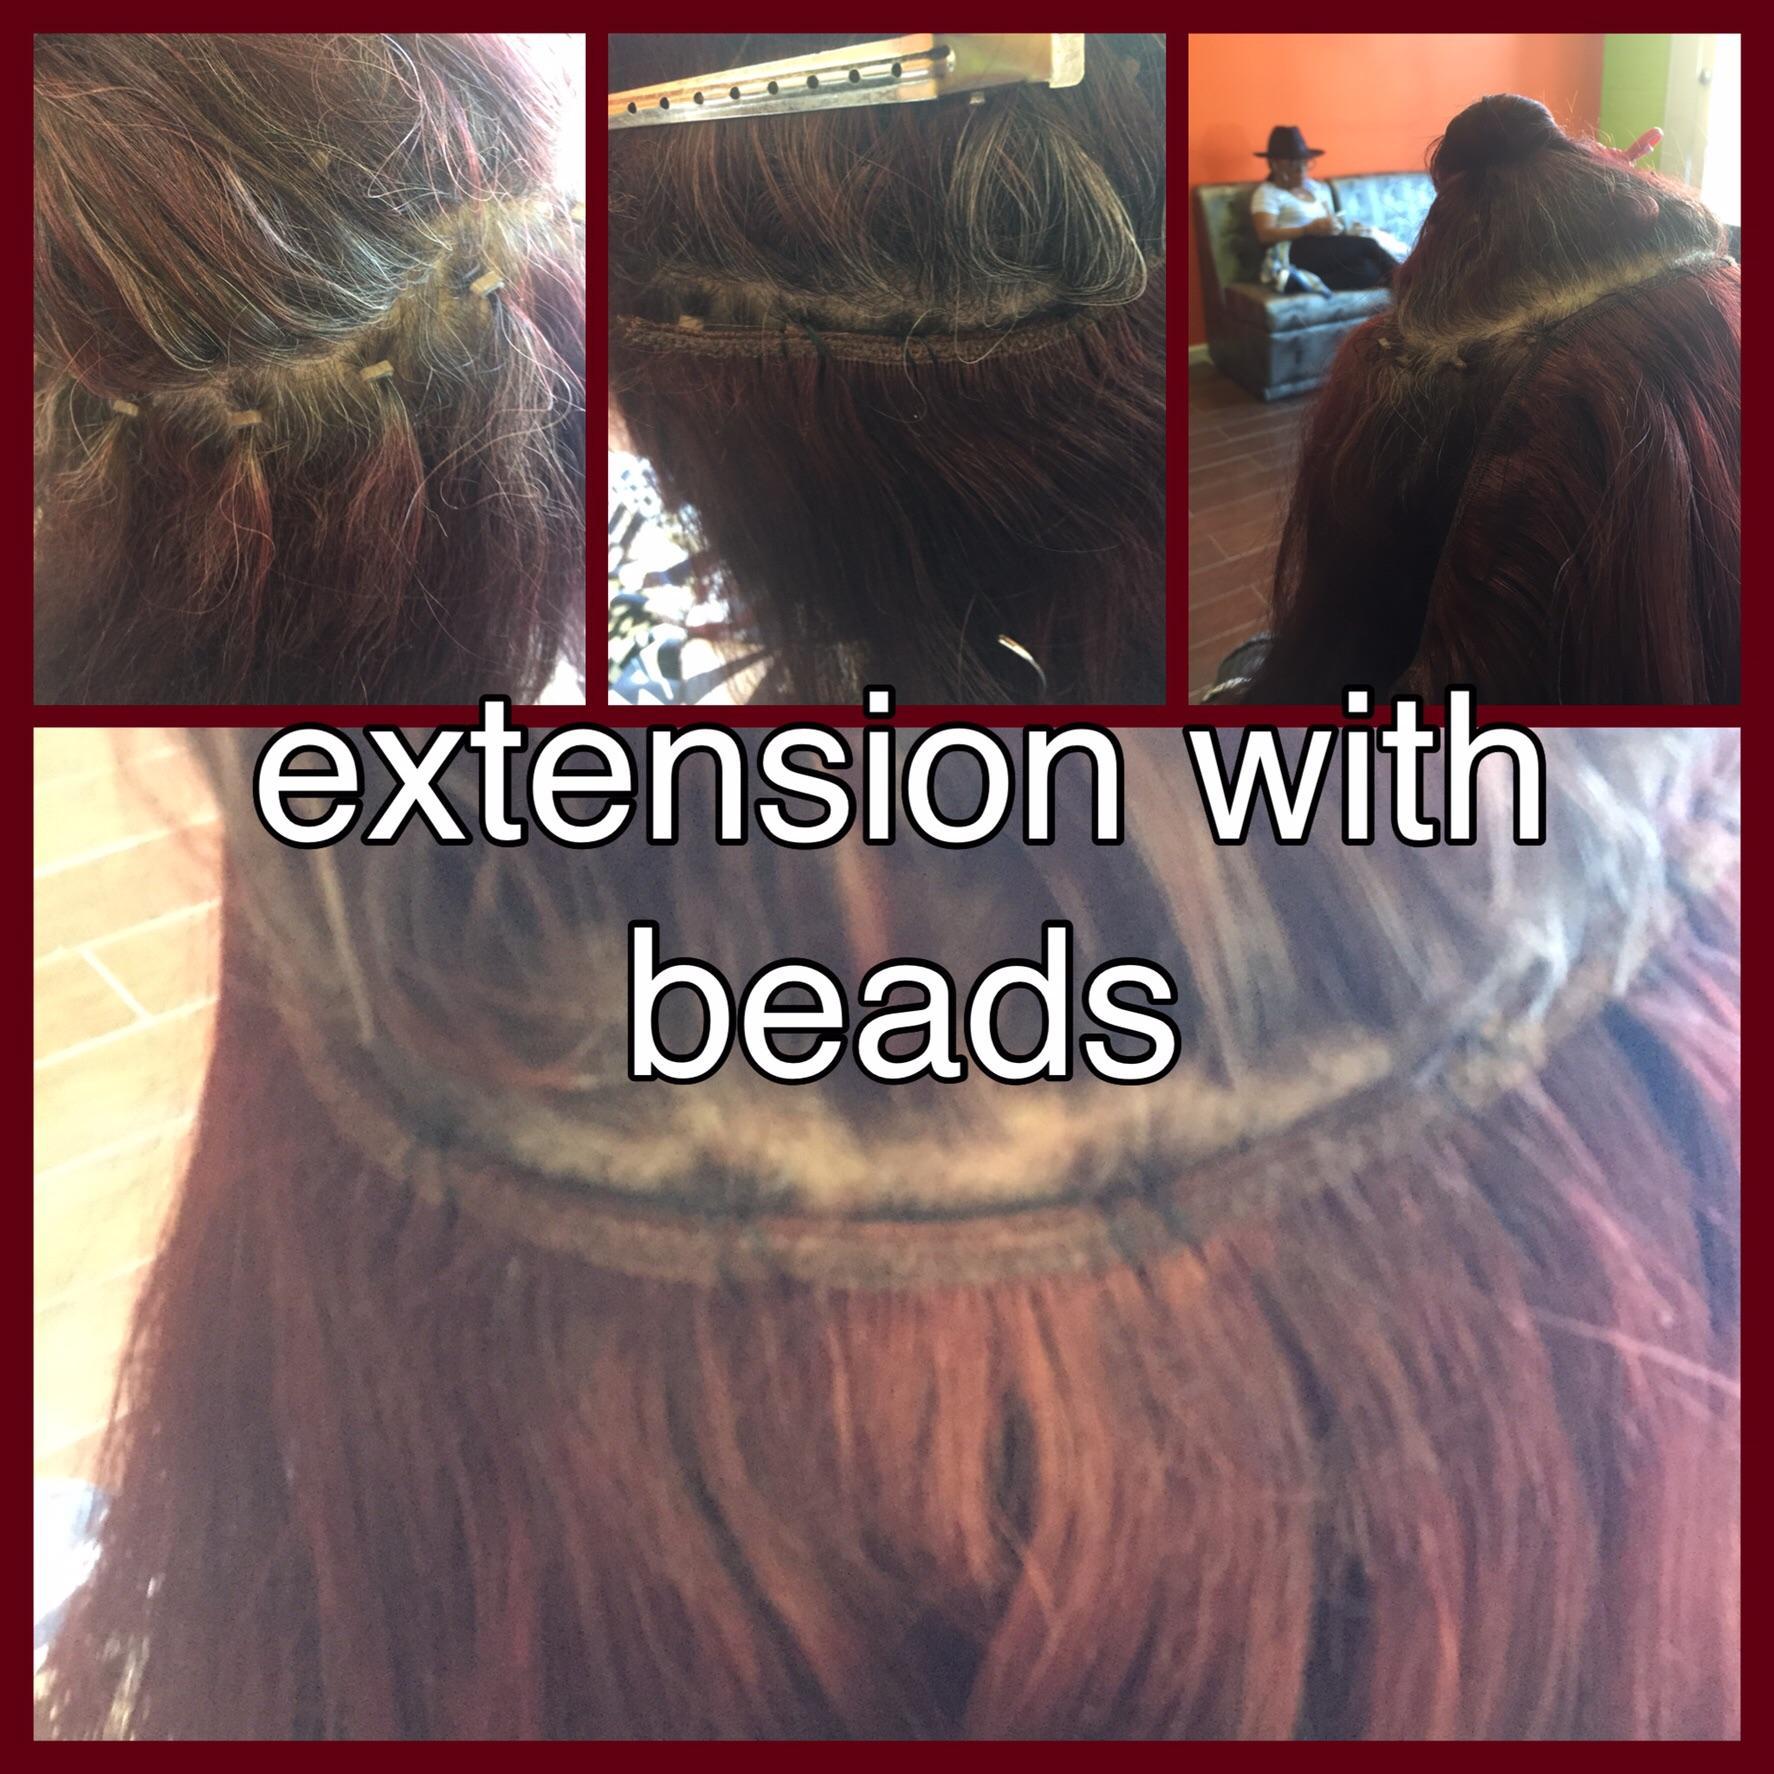 Extensions individually sewn on to beads